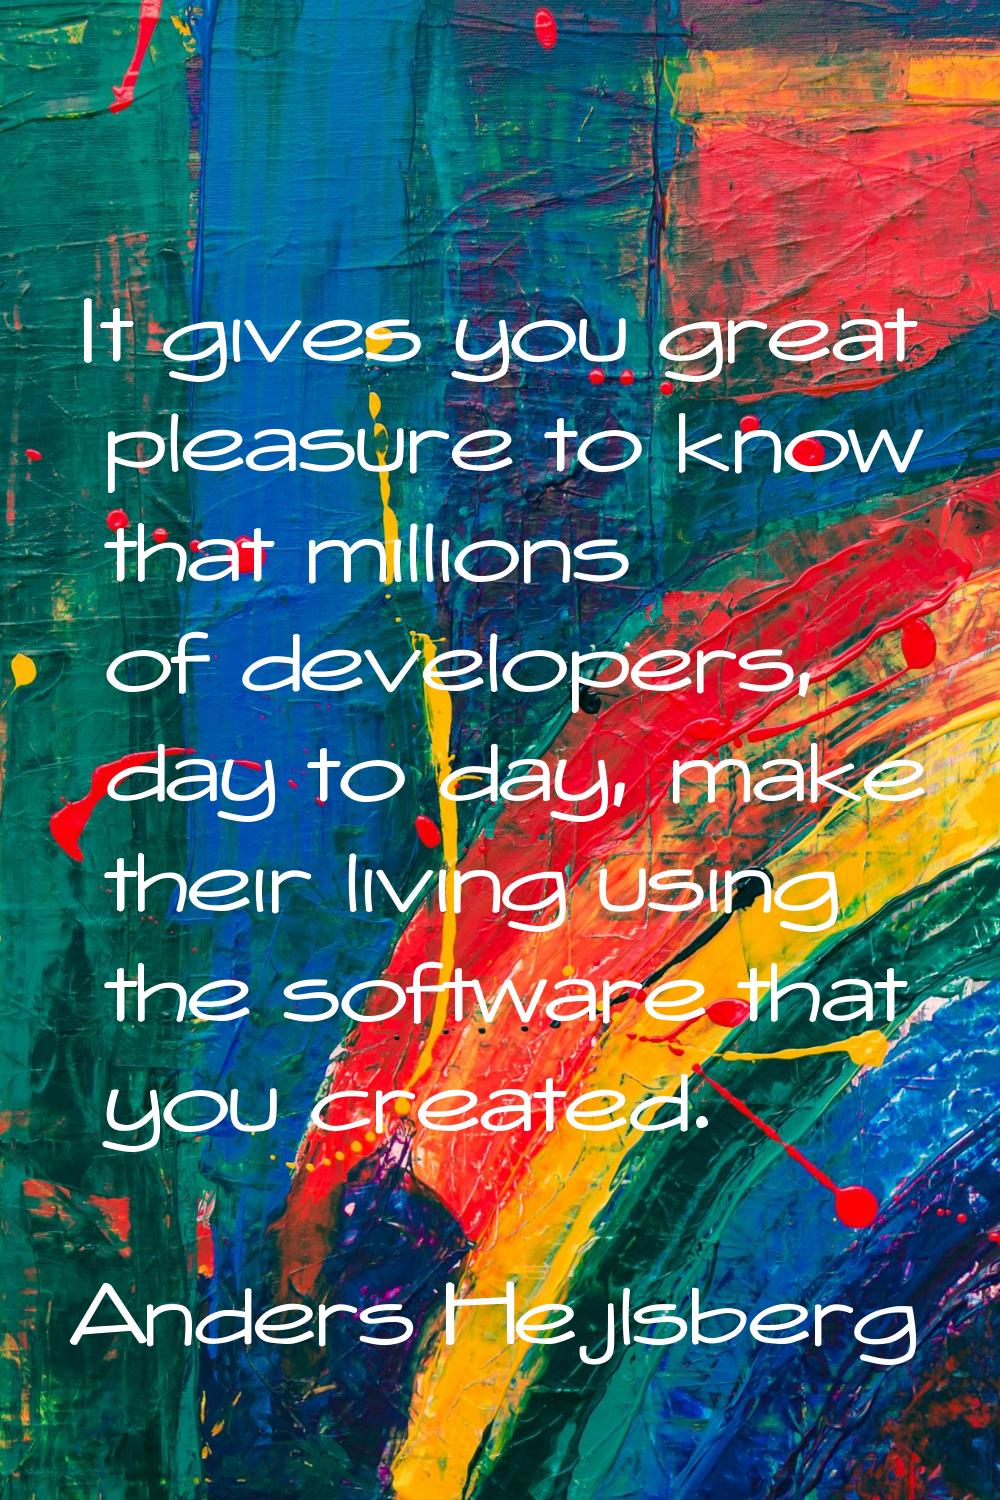 It gives you great pleasure to know that millions of developers, day to day, make their living usin